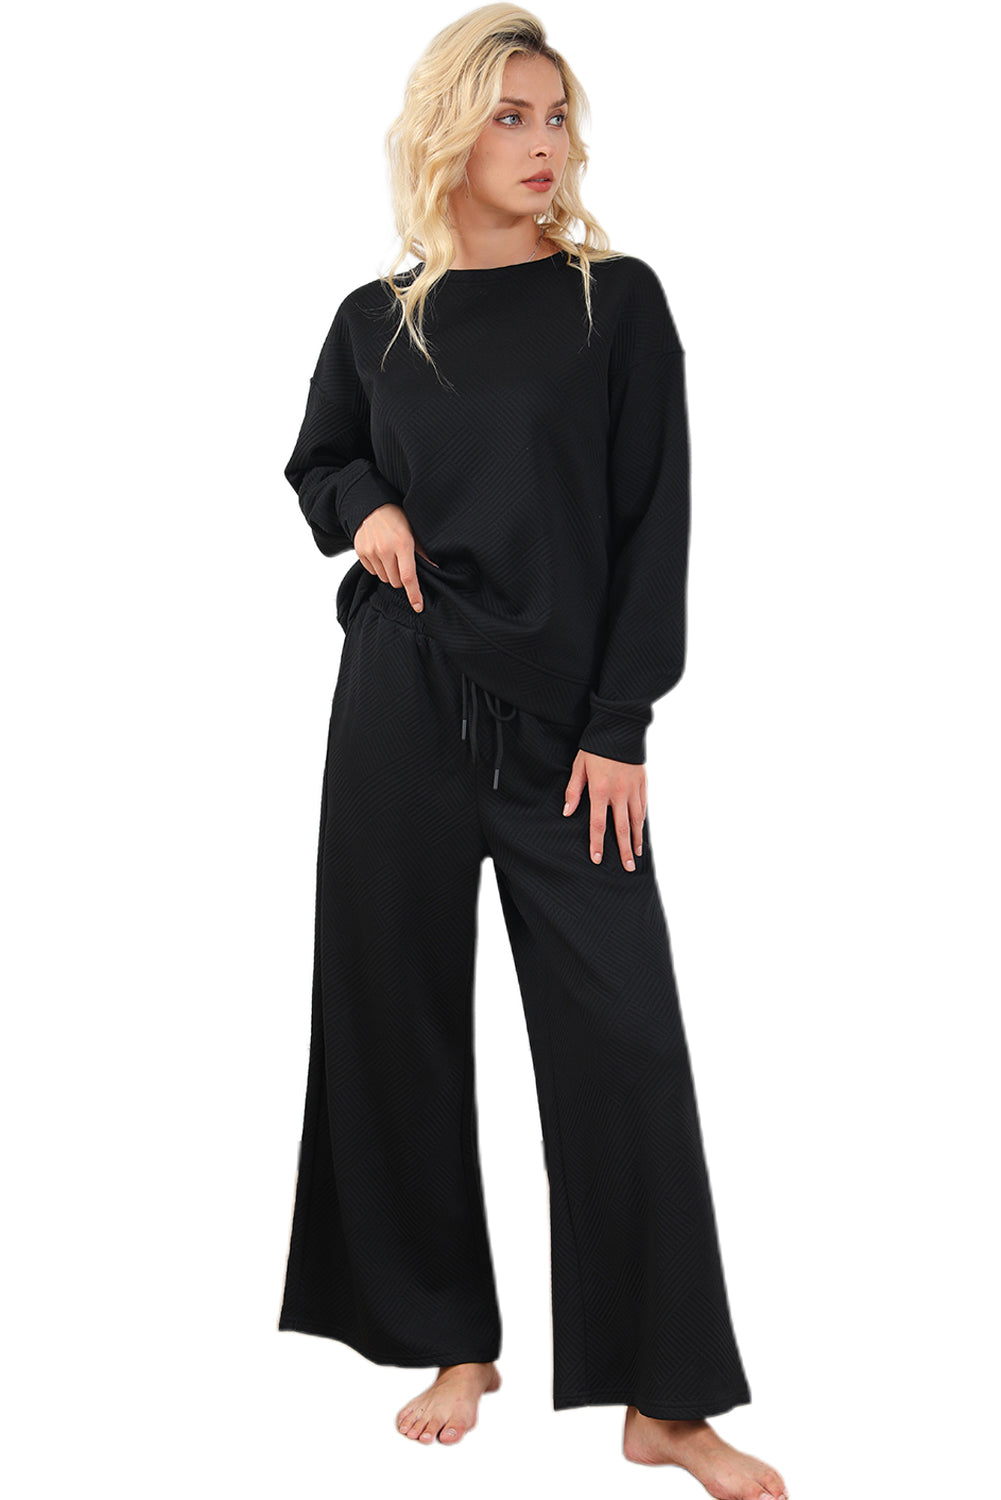 Black Ultra Loose Textured 2pcs Slouchy Outfit